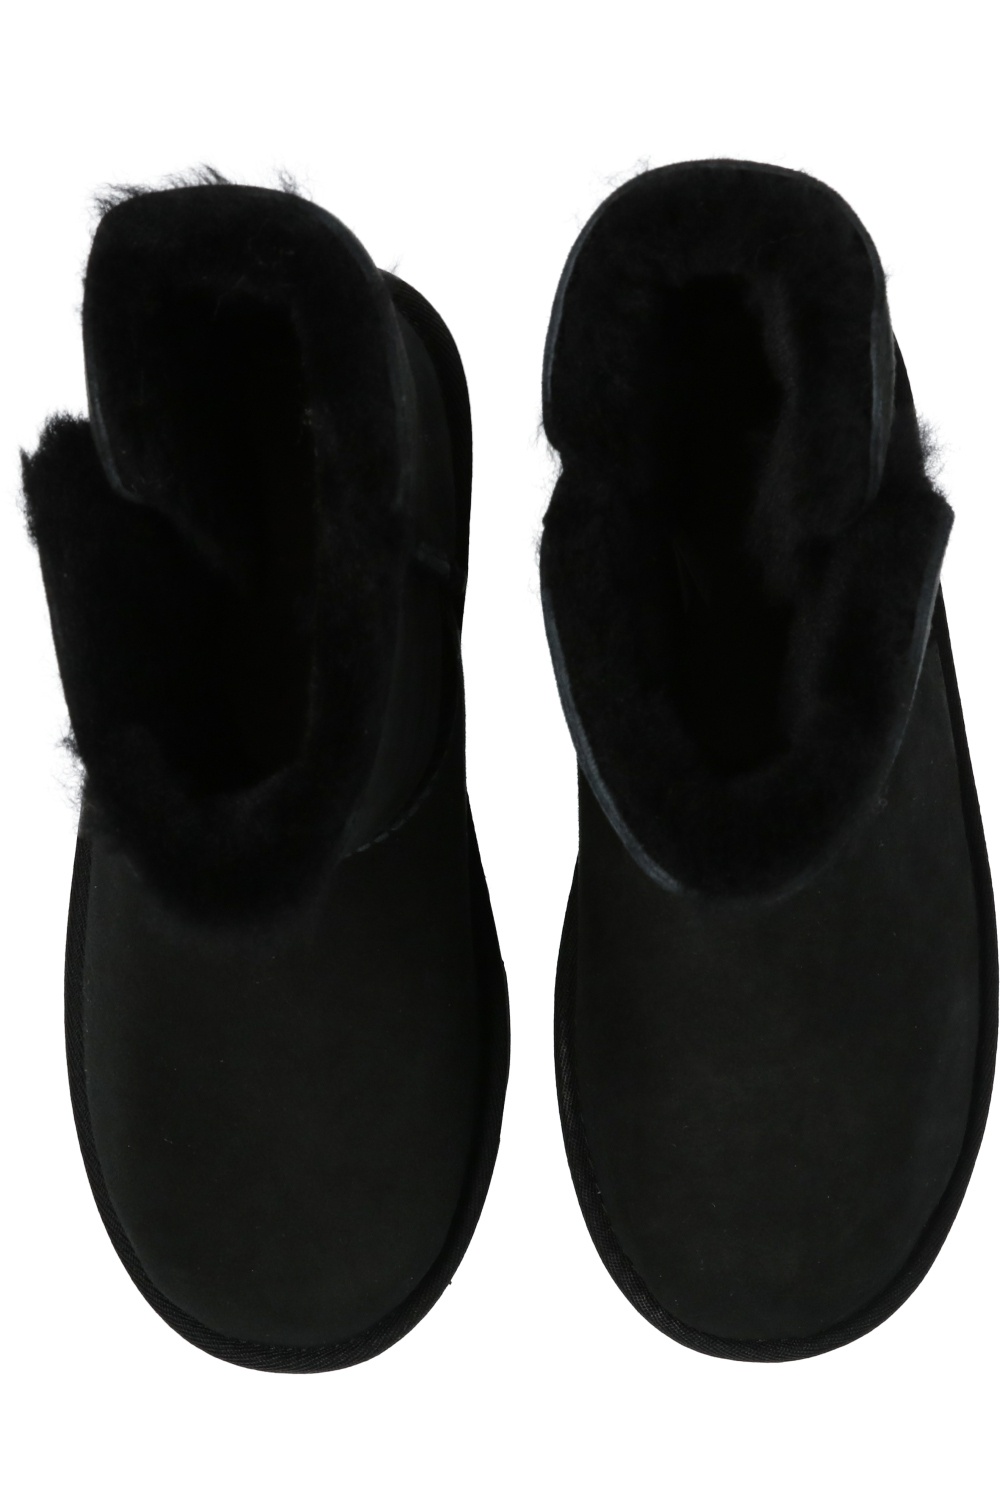 ugg New Kids ‘K Bailey Button II’ snow boots